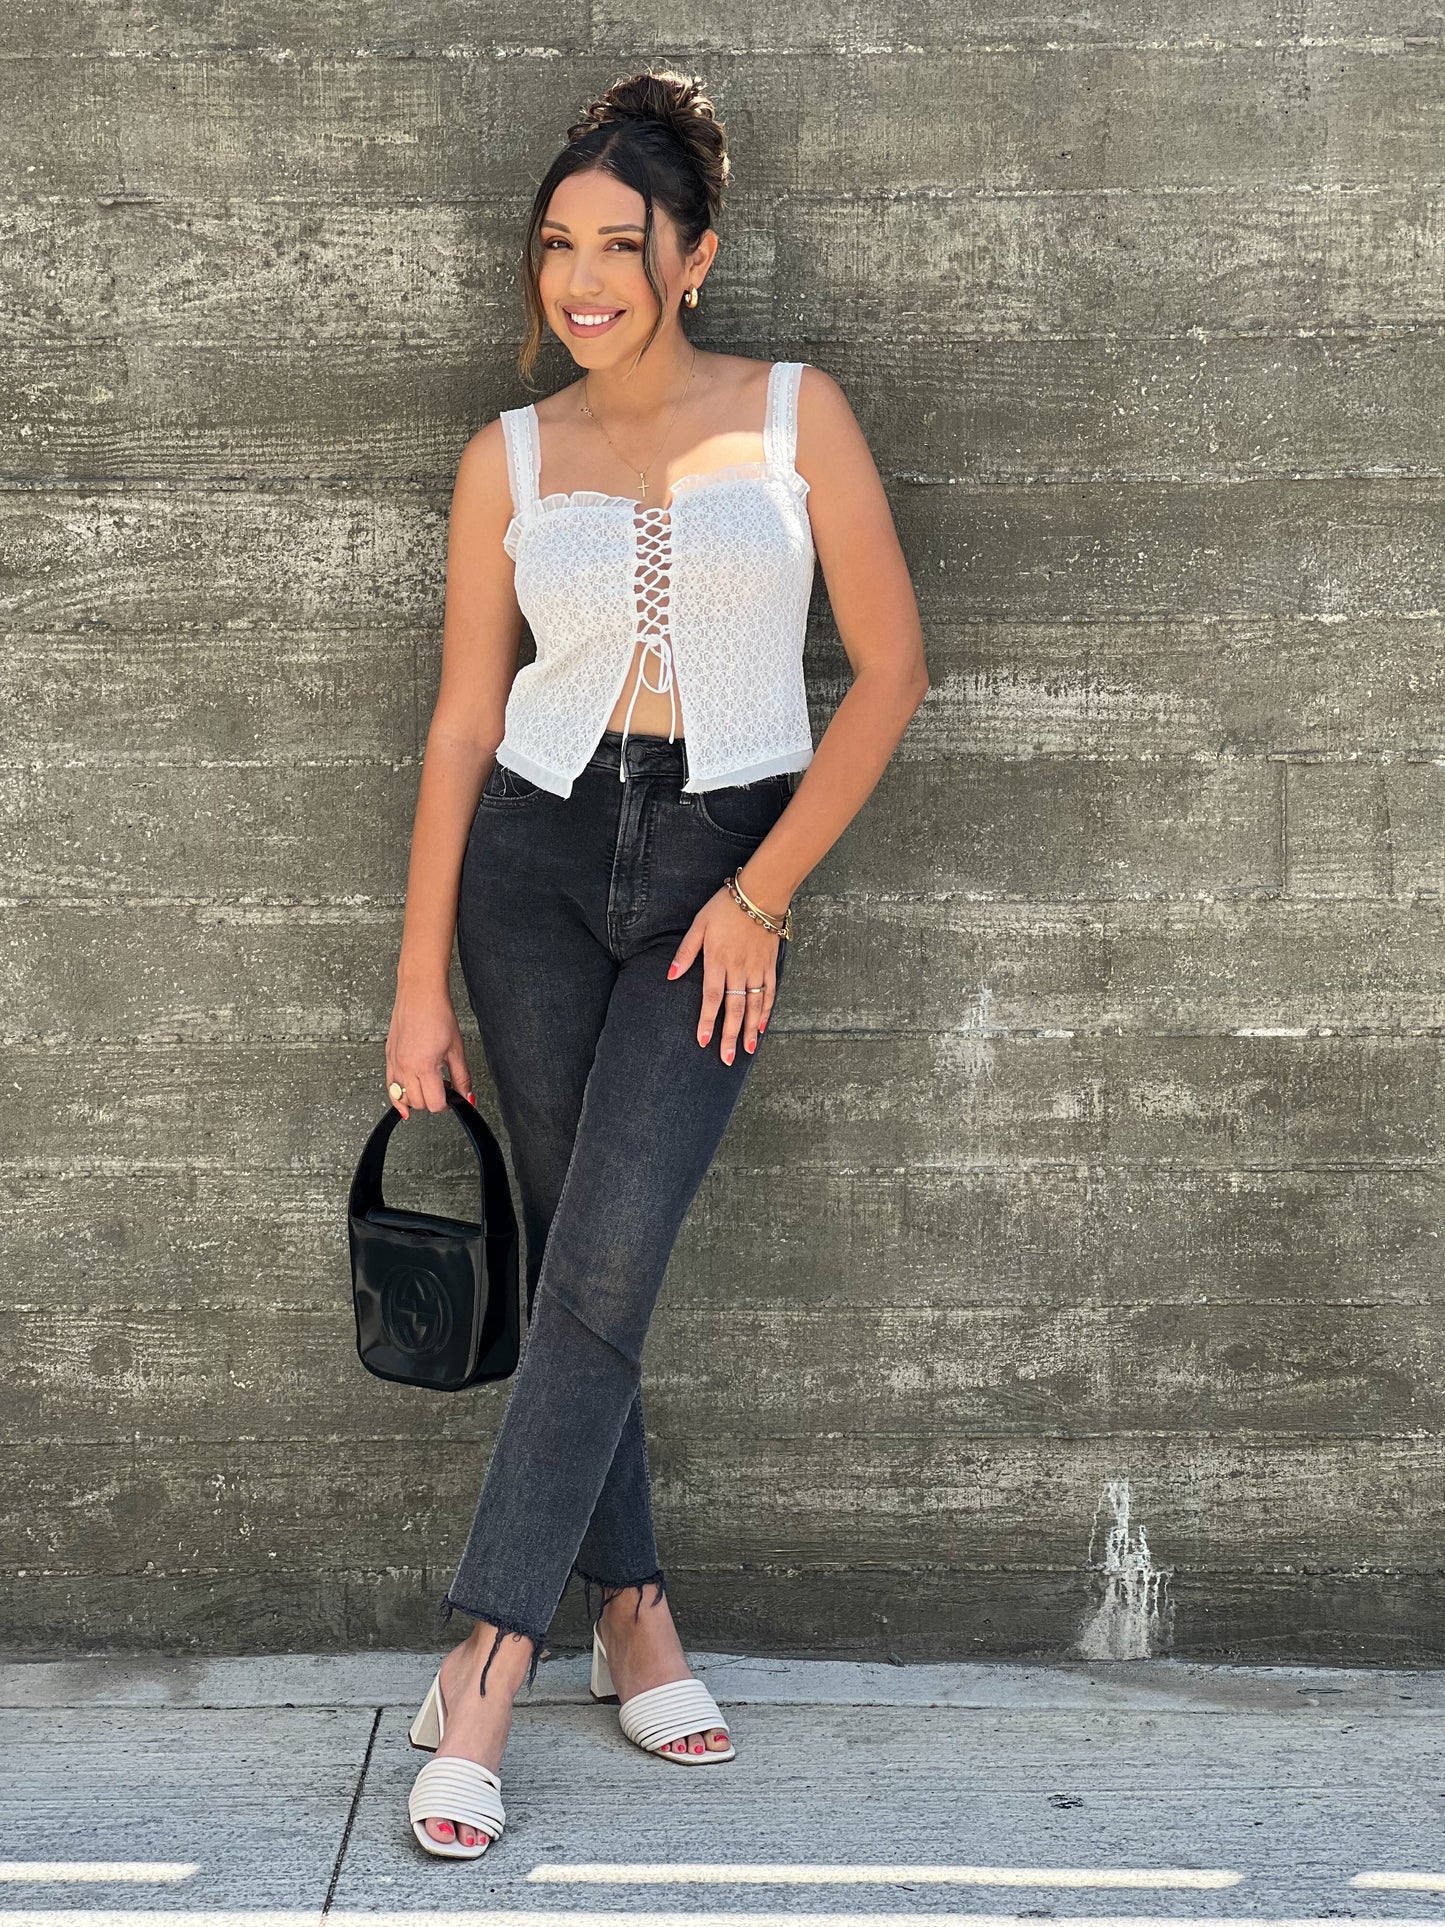 A brown skinned latina girl is wearing a white sleeveless lace string top. She paired it with black jeans and white sandals. She has her hair up on a bun to show the sweetheart neckline. She has gold bracelets on her right hand.